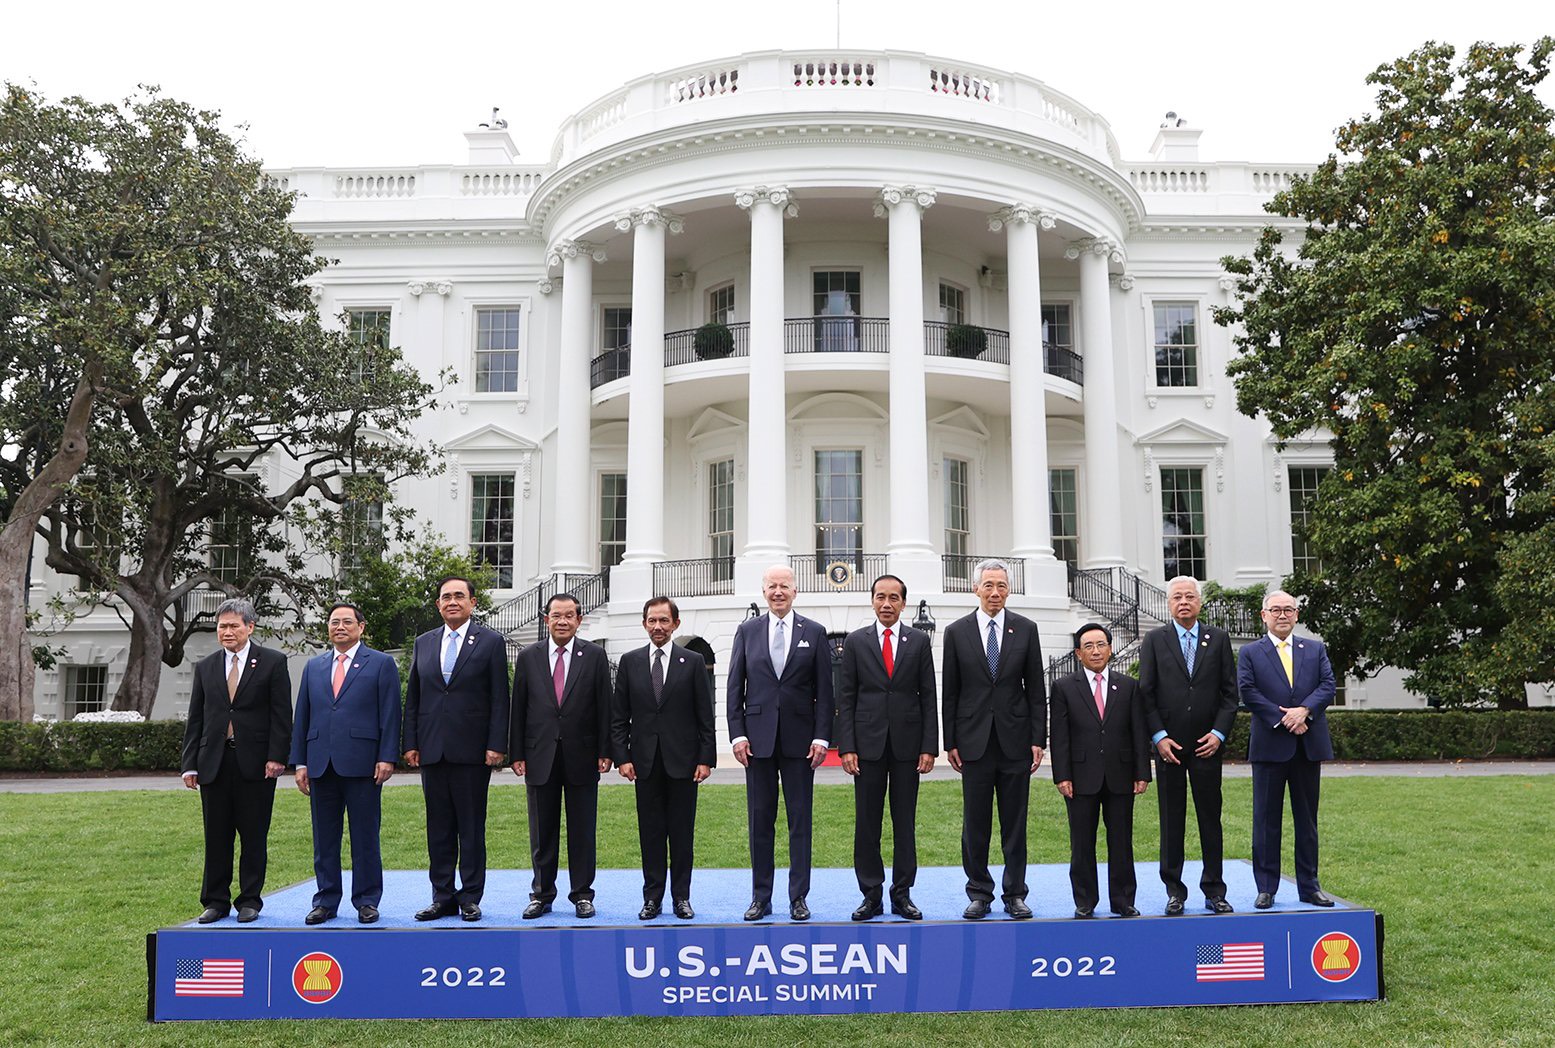 U.S. President Joe Biden and leaders of ASEAN member countries pose for a photo in Washington, D.C., May 12, 2022. Photo: Duong Giang / Tuoi Tre